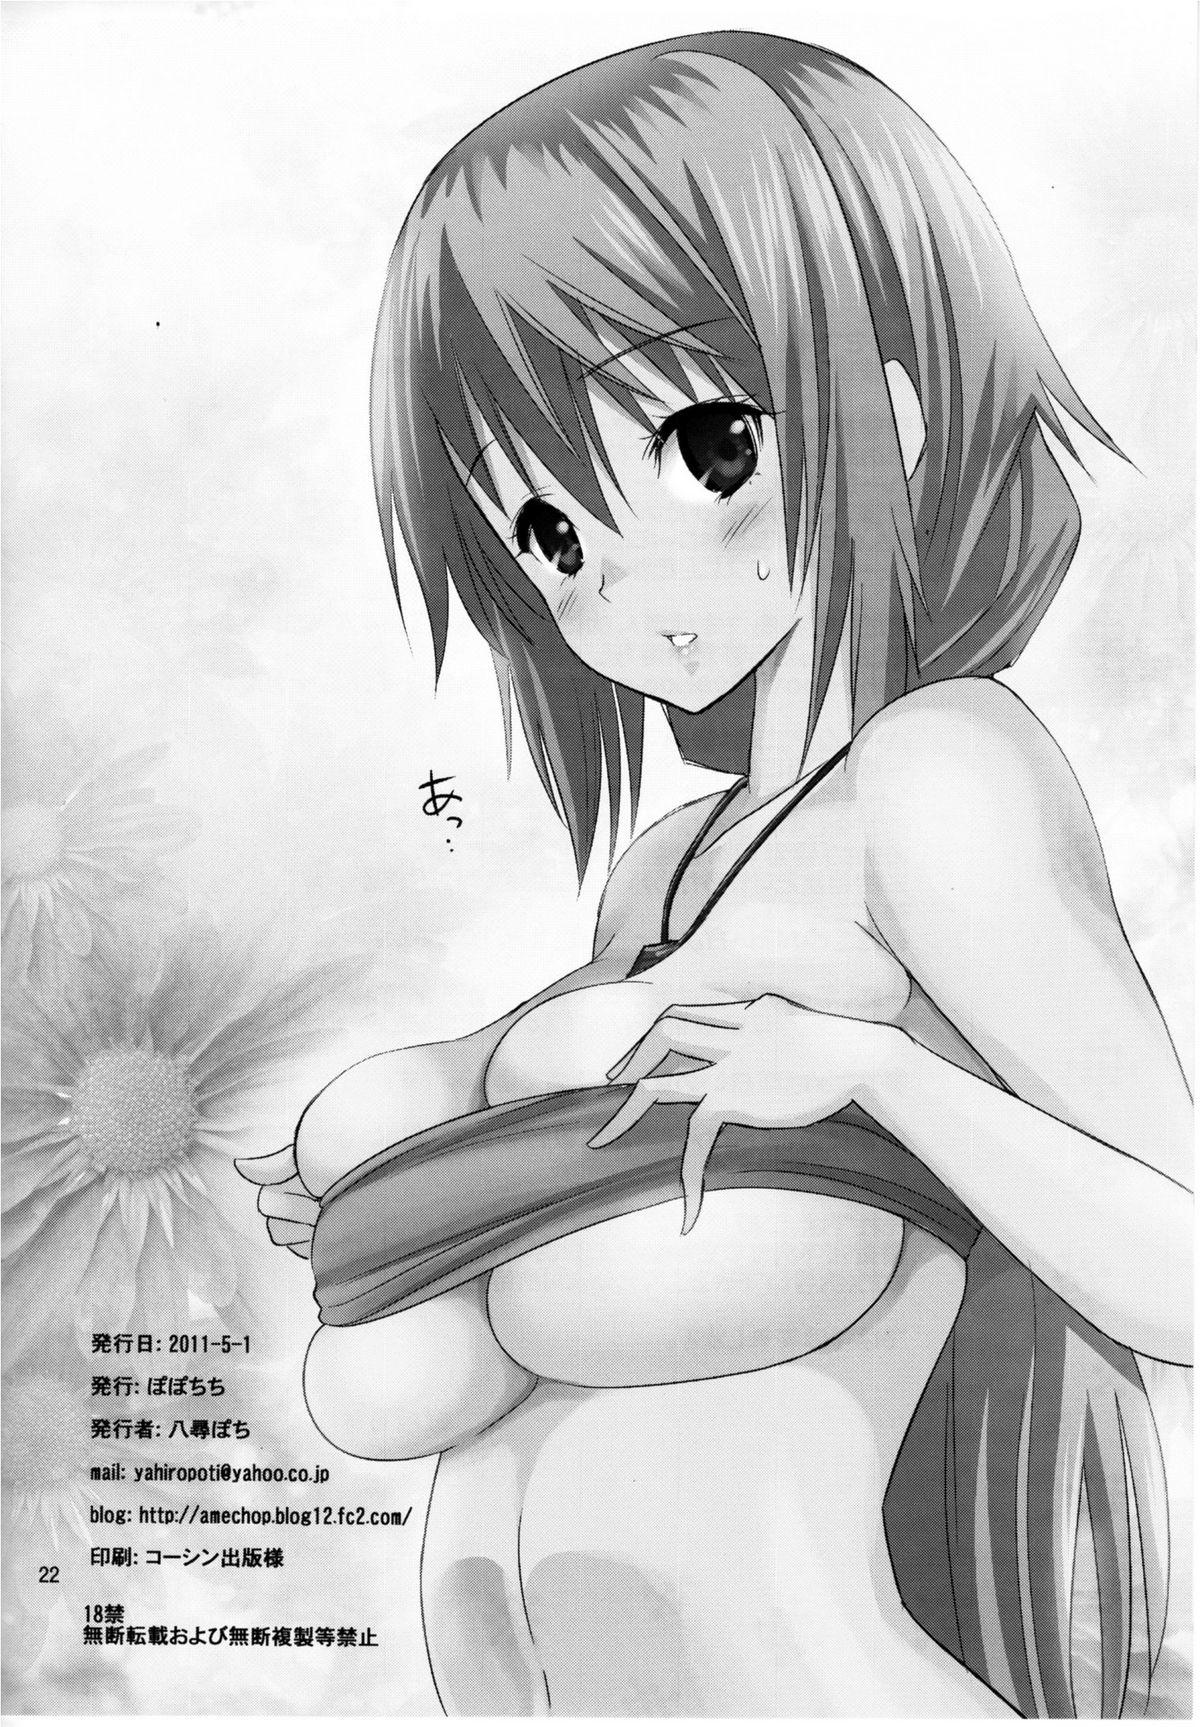 Hot Girl Pussy This is Harlem - Infinite stratos Smoking - Page 21